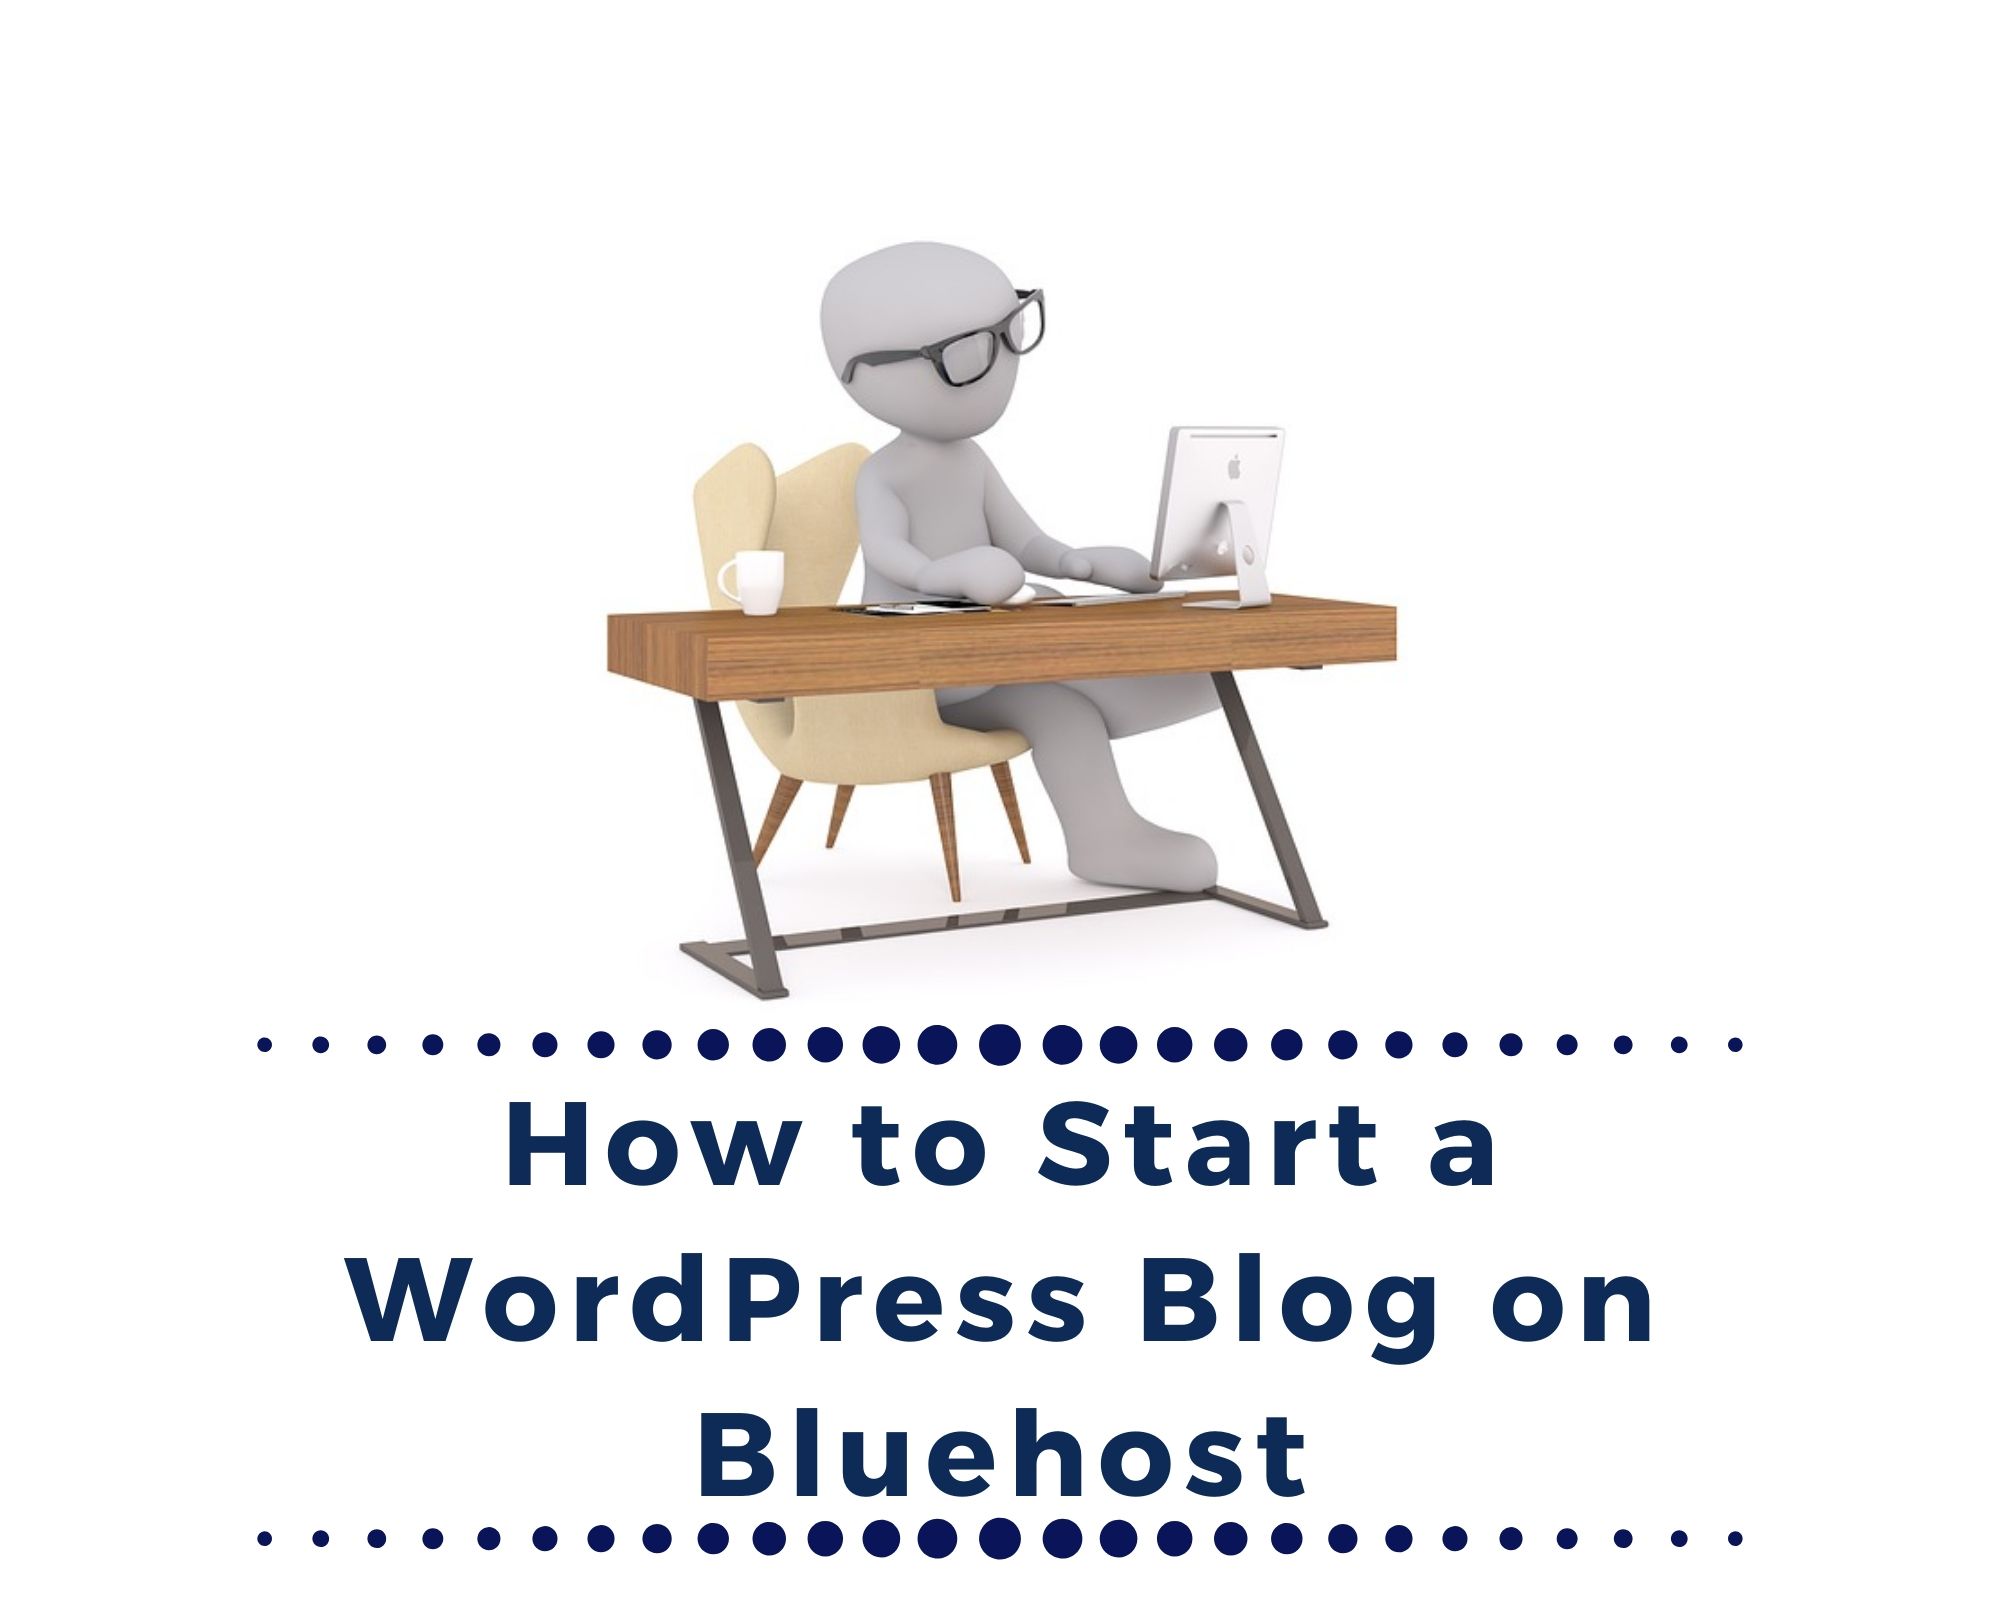 How to start a WordPress blog on Bluehost